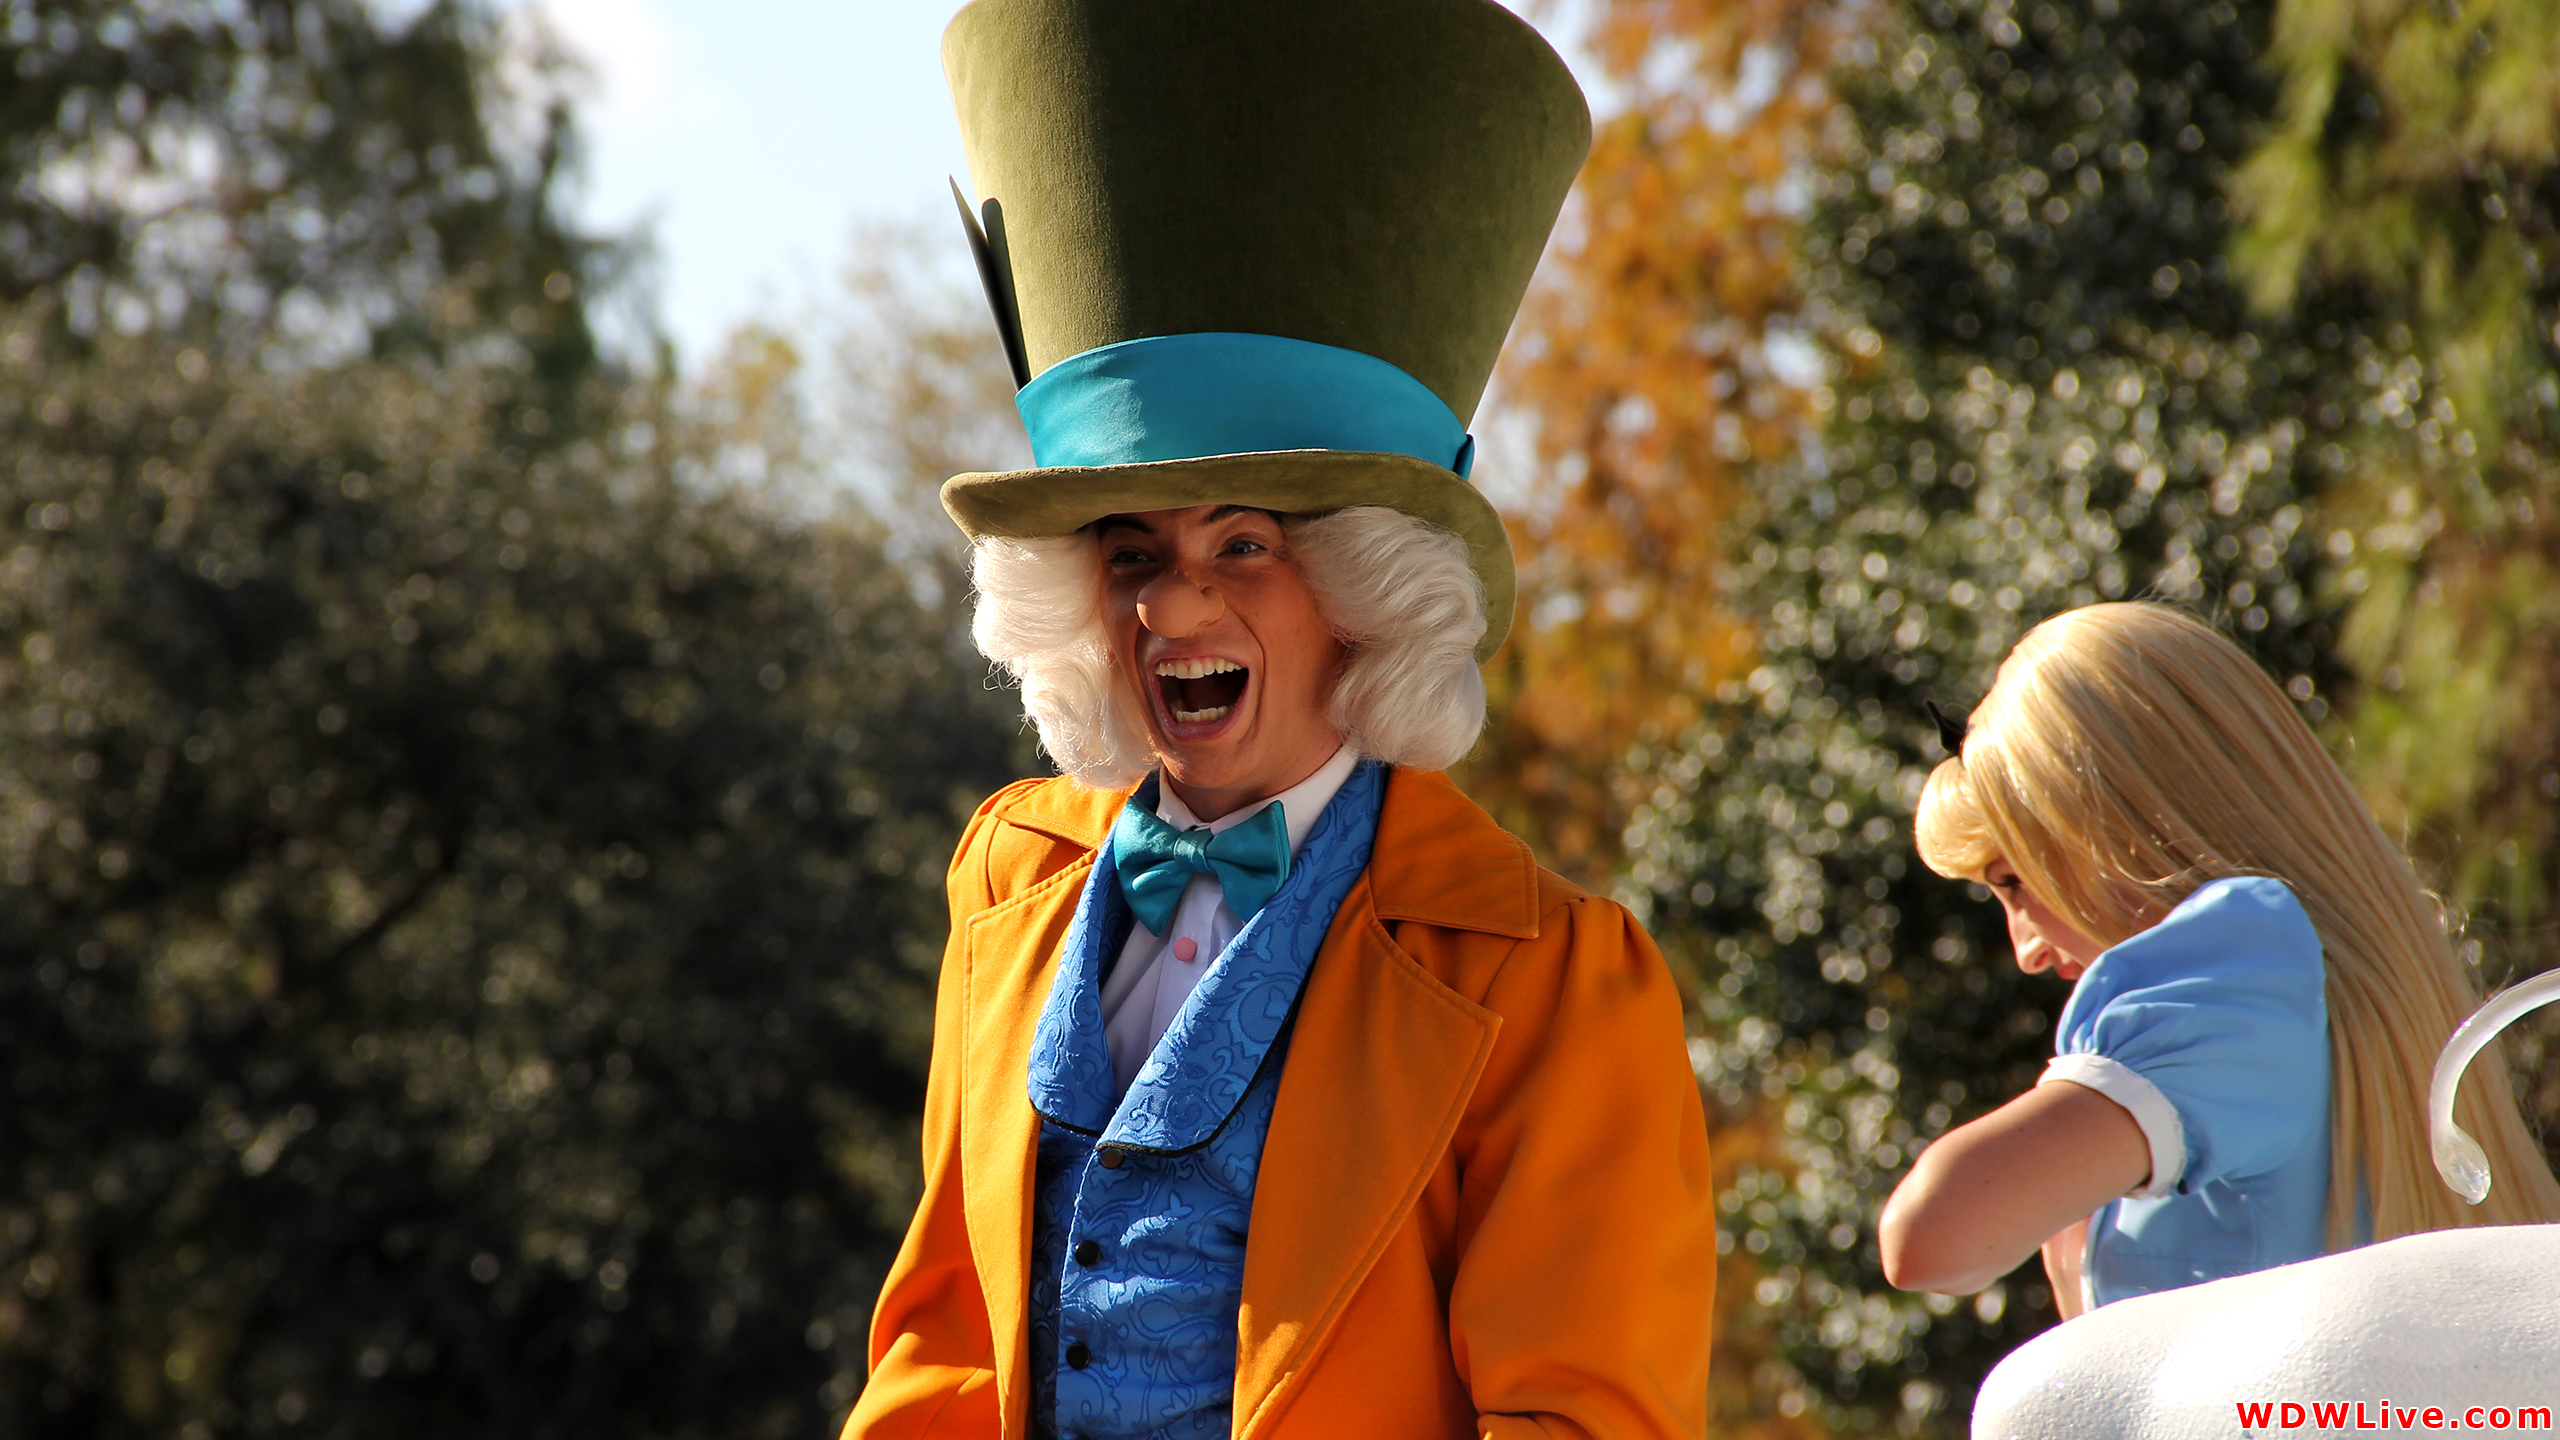 Celebrate A Dream Come True Parade: The Mad Hatter having a good time!